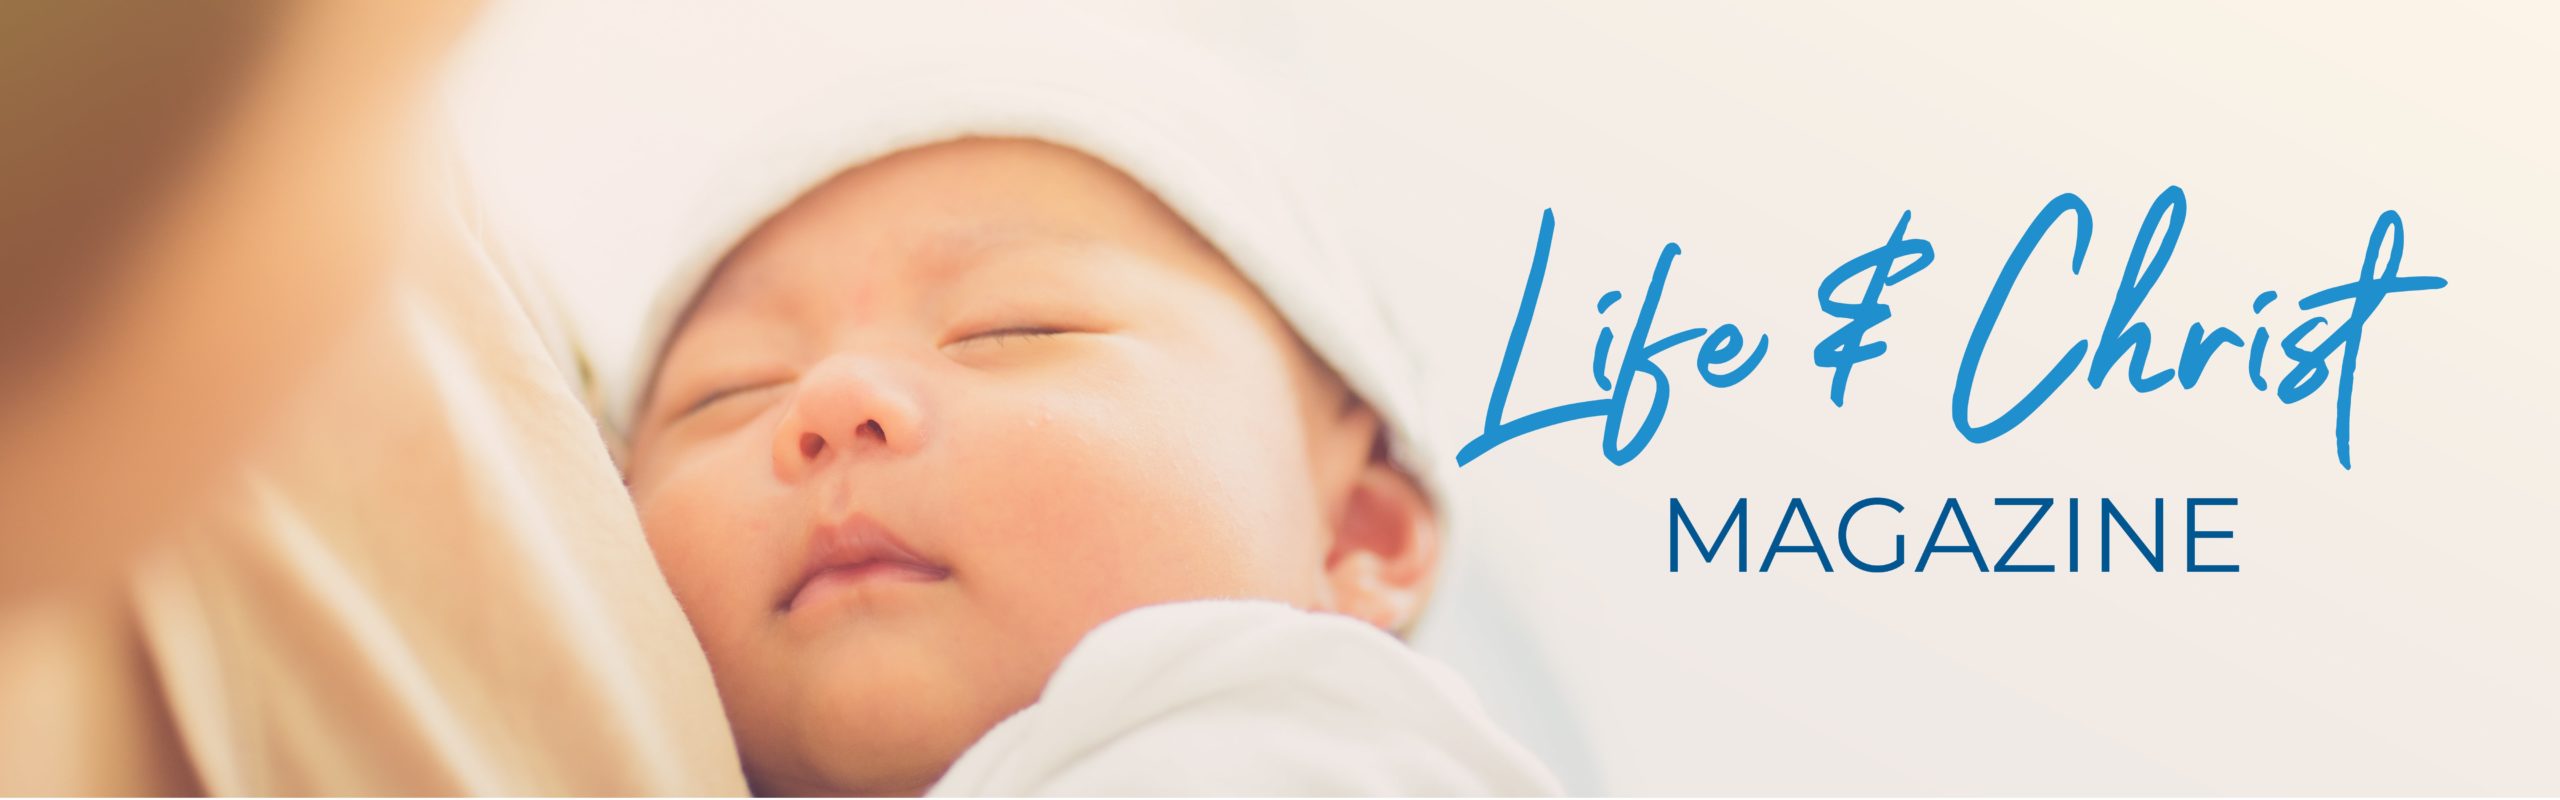 Life & Christ Magazine Banner image of mother holding baby in soft warm light